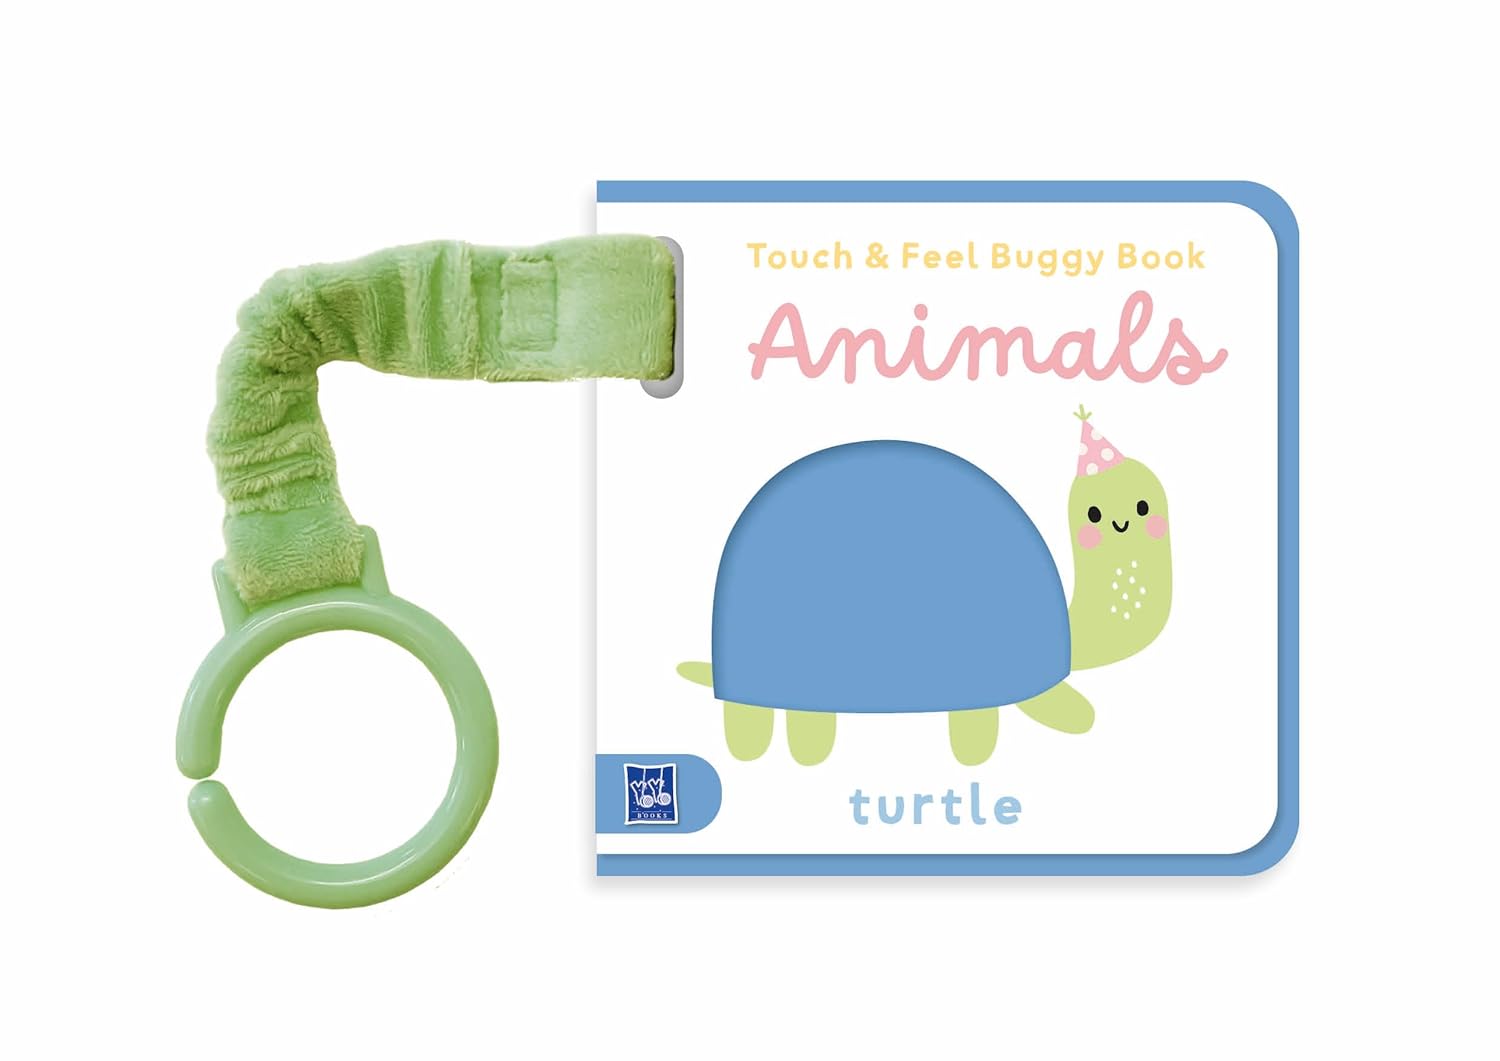 Touch & Feel Buggy Book: Animals